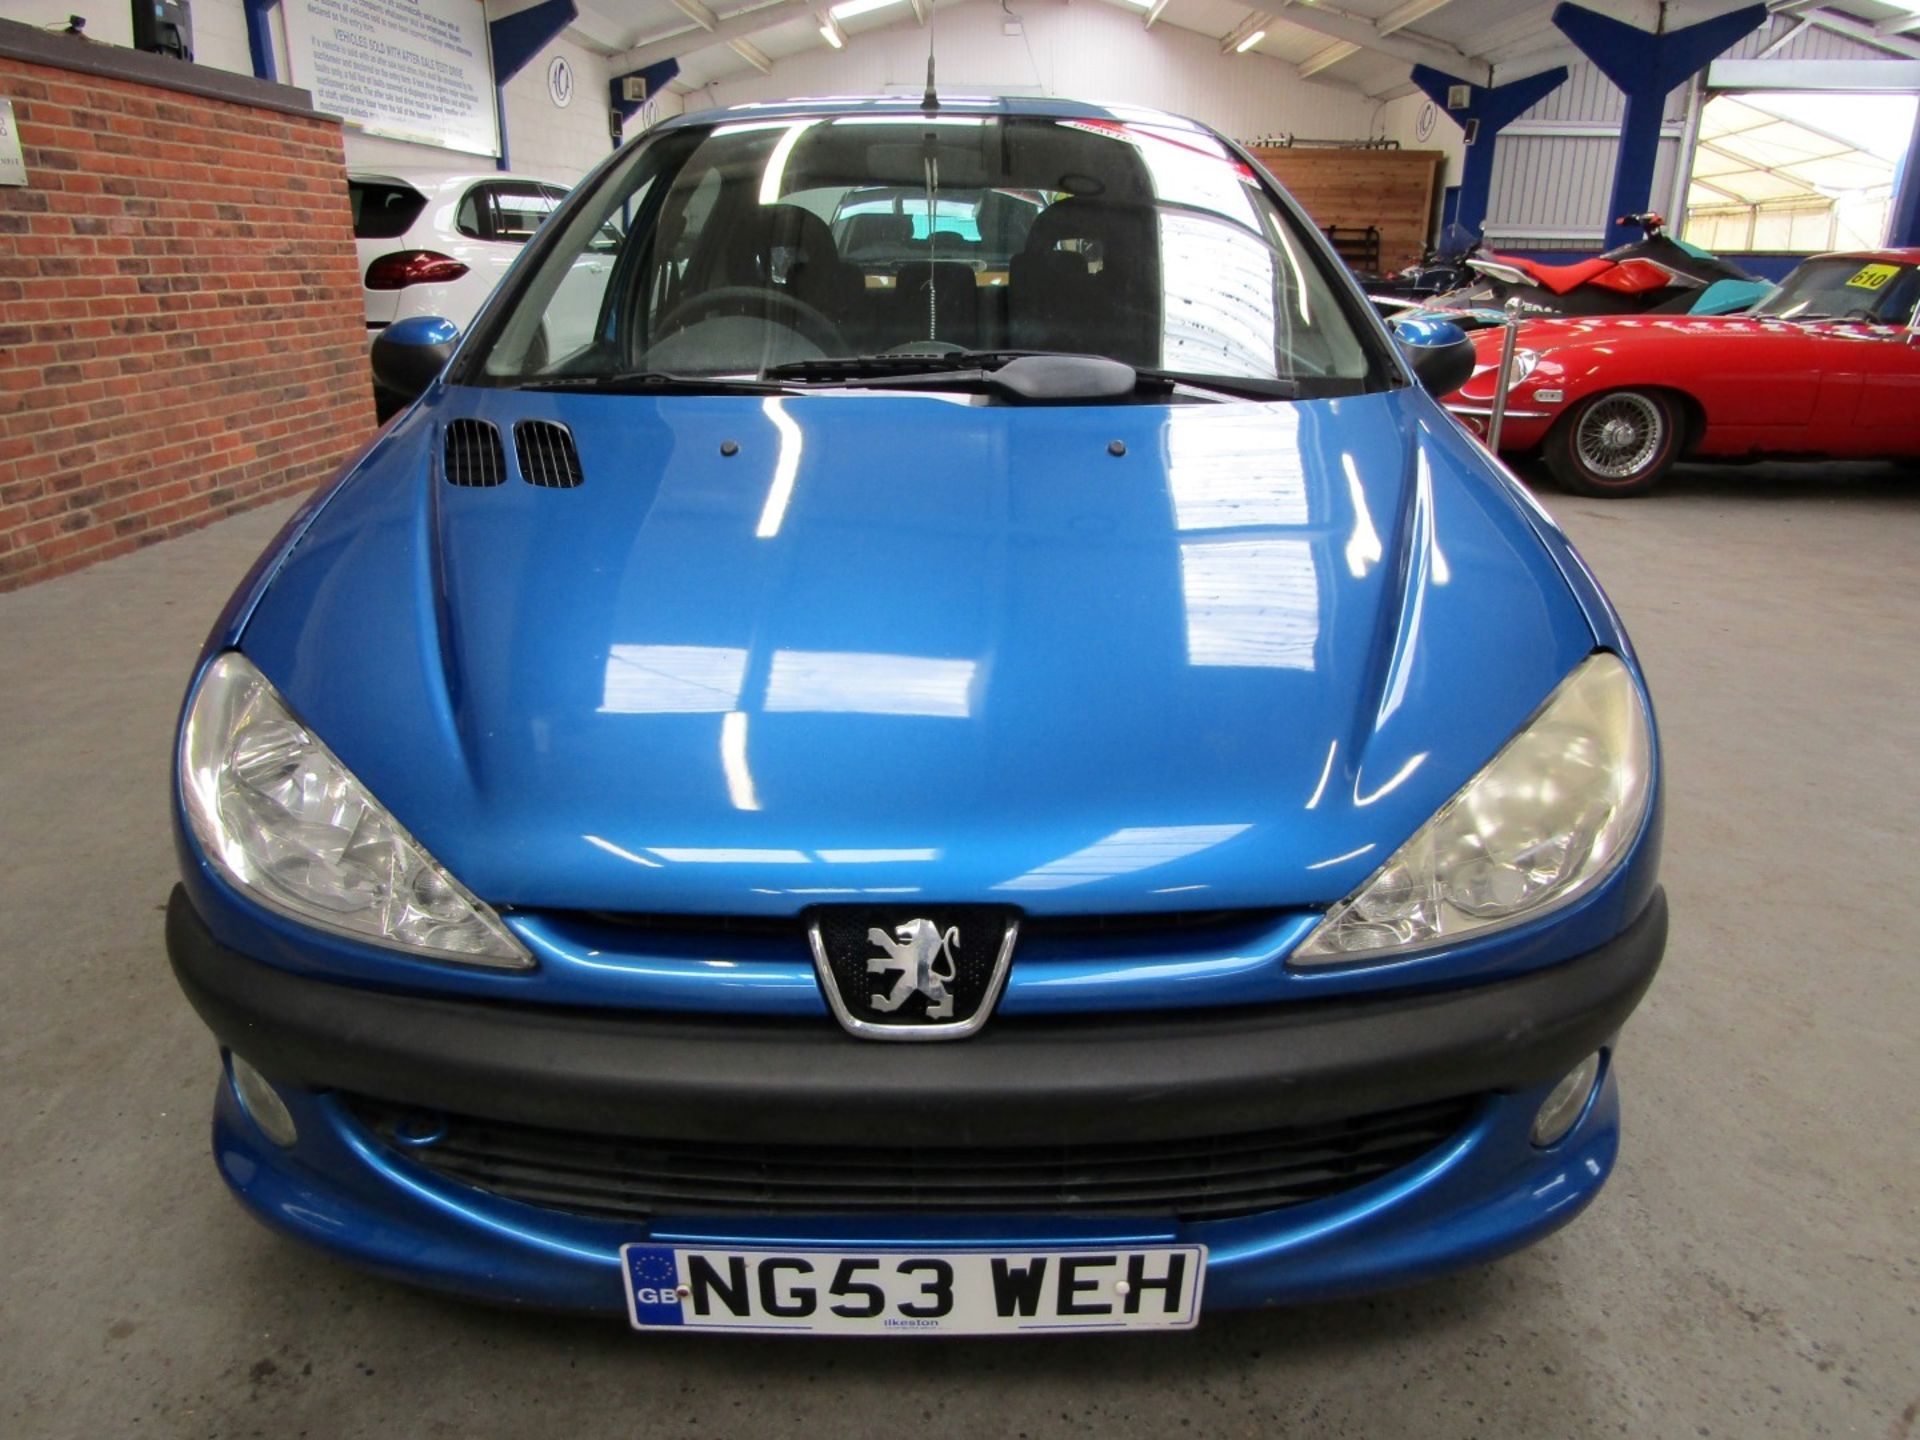 53 03 Peugeot 206 Entice - Image 2 of 21